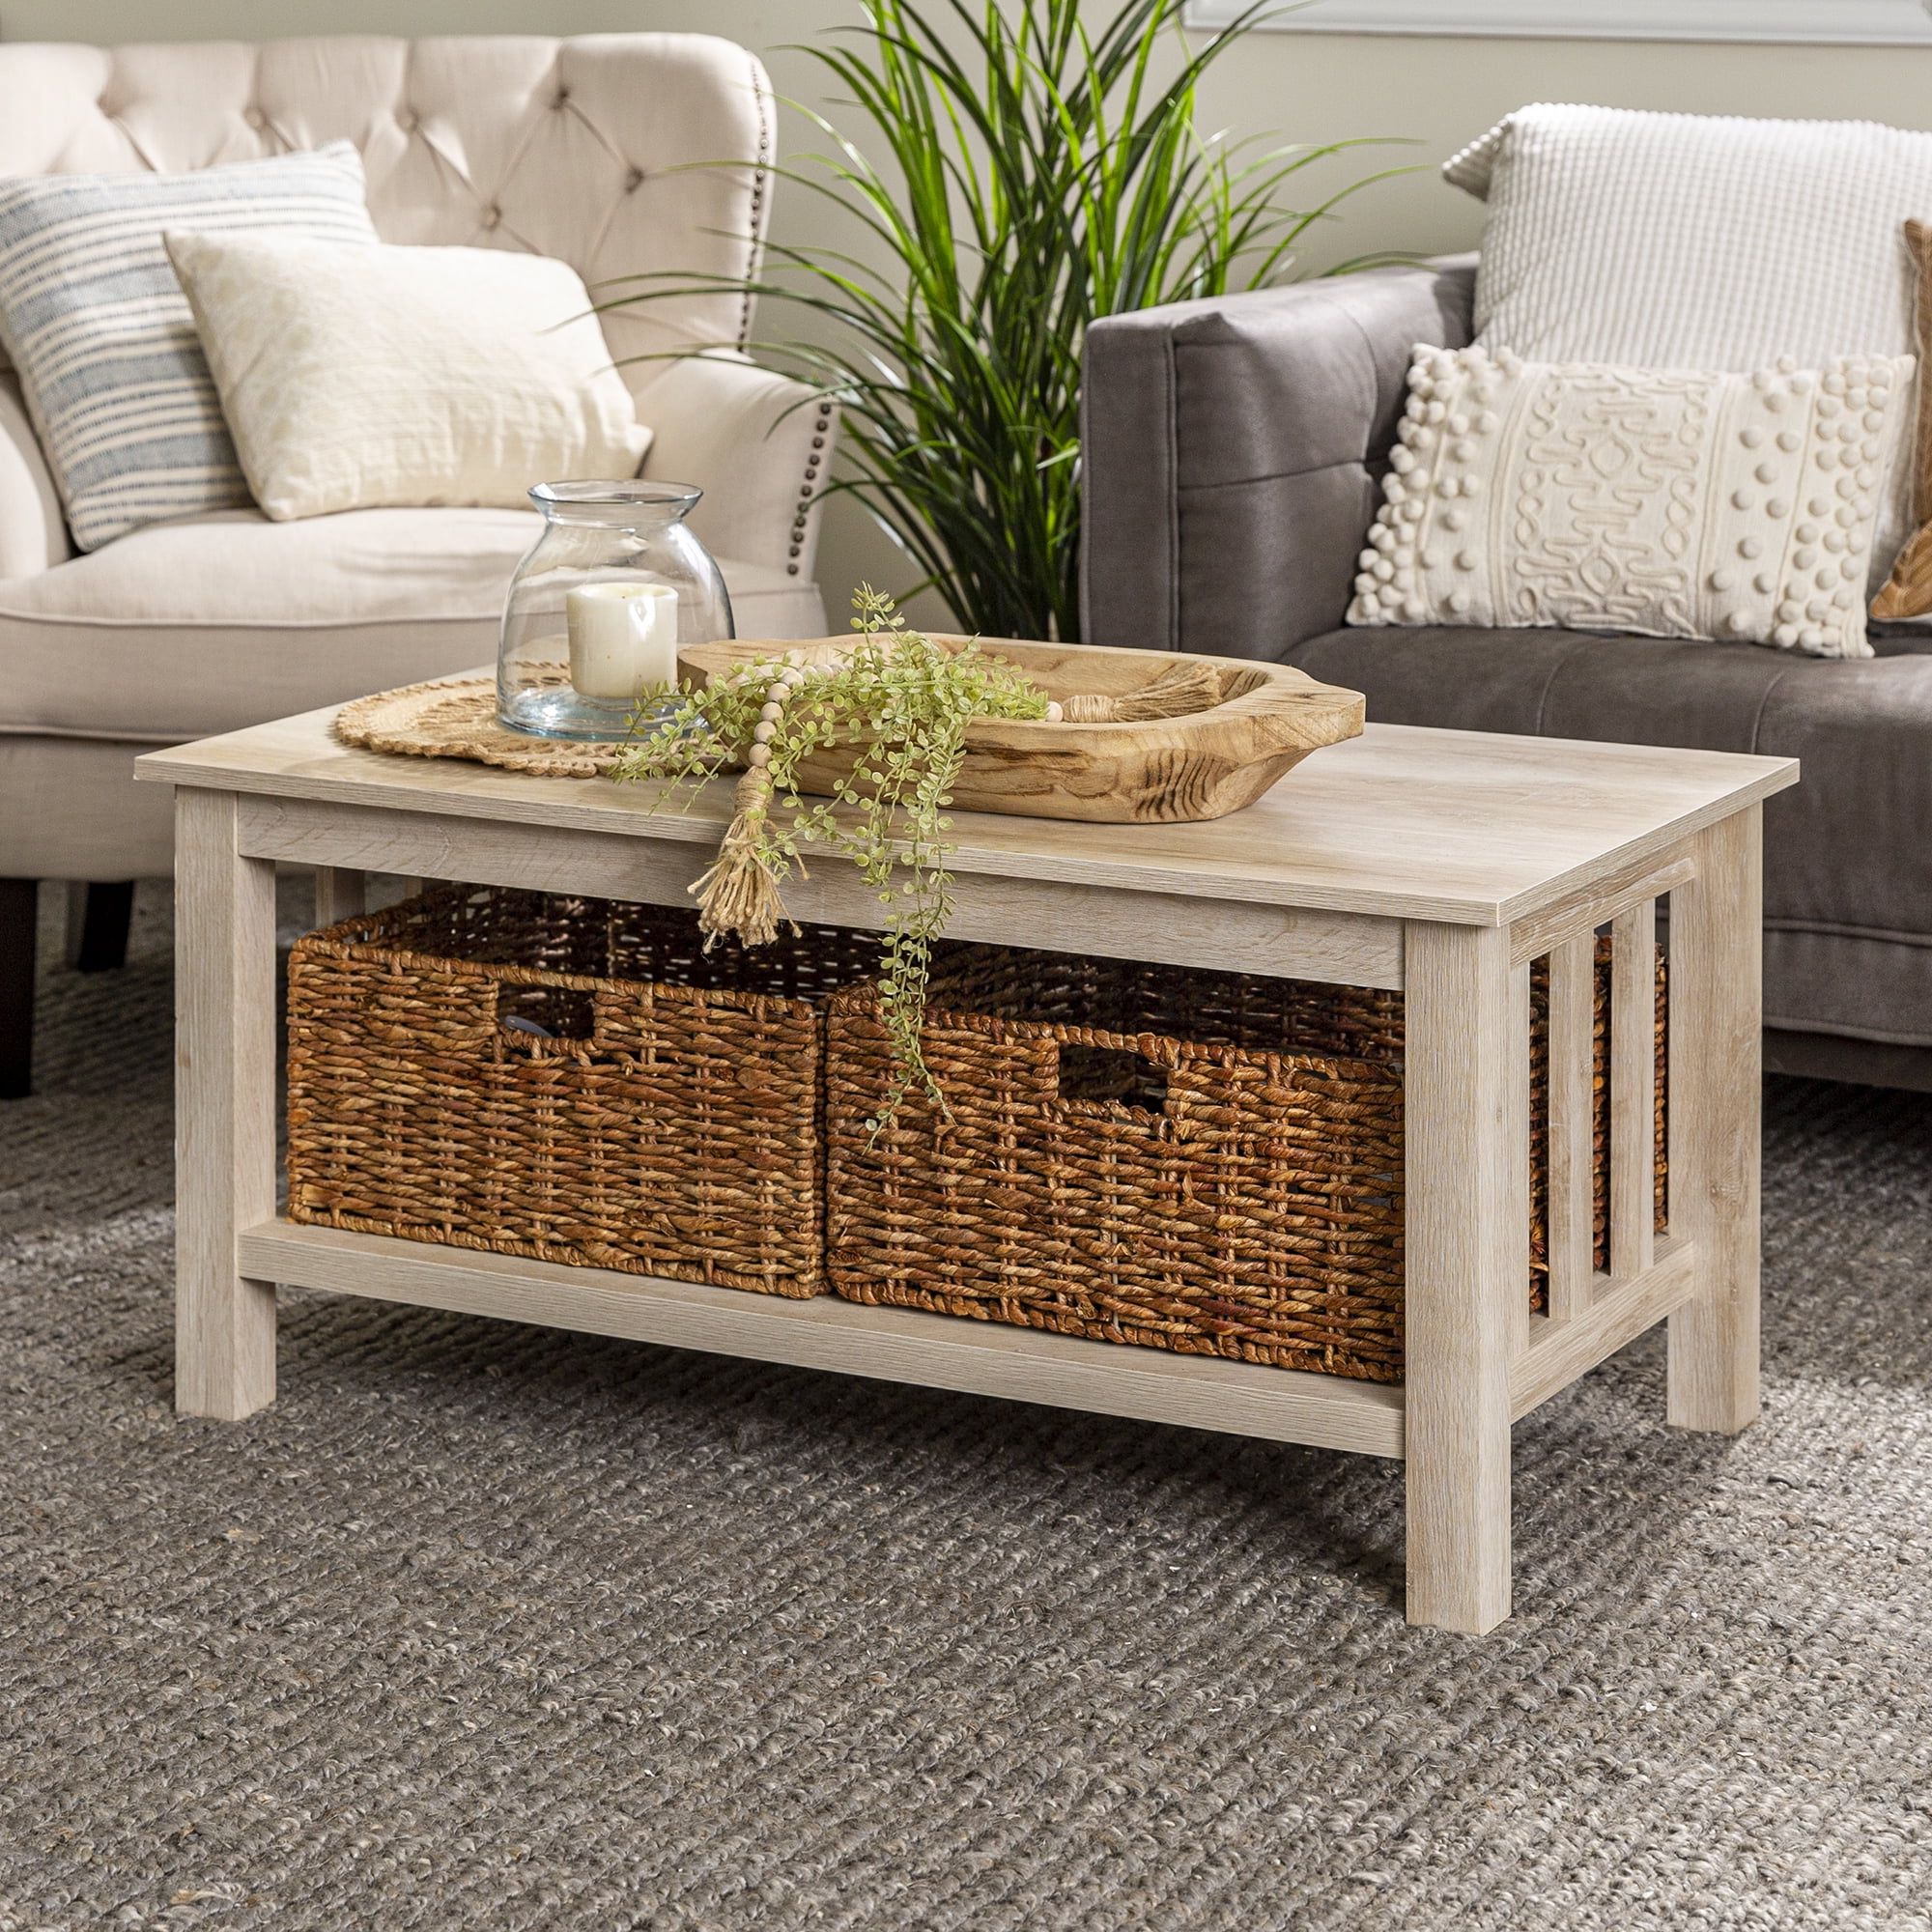 Coffee Tables With Open Storage Shelves Inside Famous Woven Paths Traditional Storage Coffee Table With Bins, White Oak (View 14 of 15)